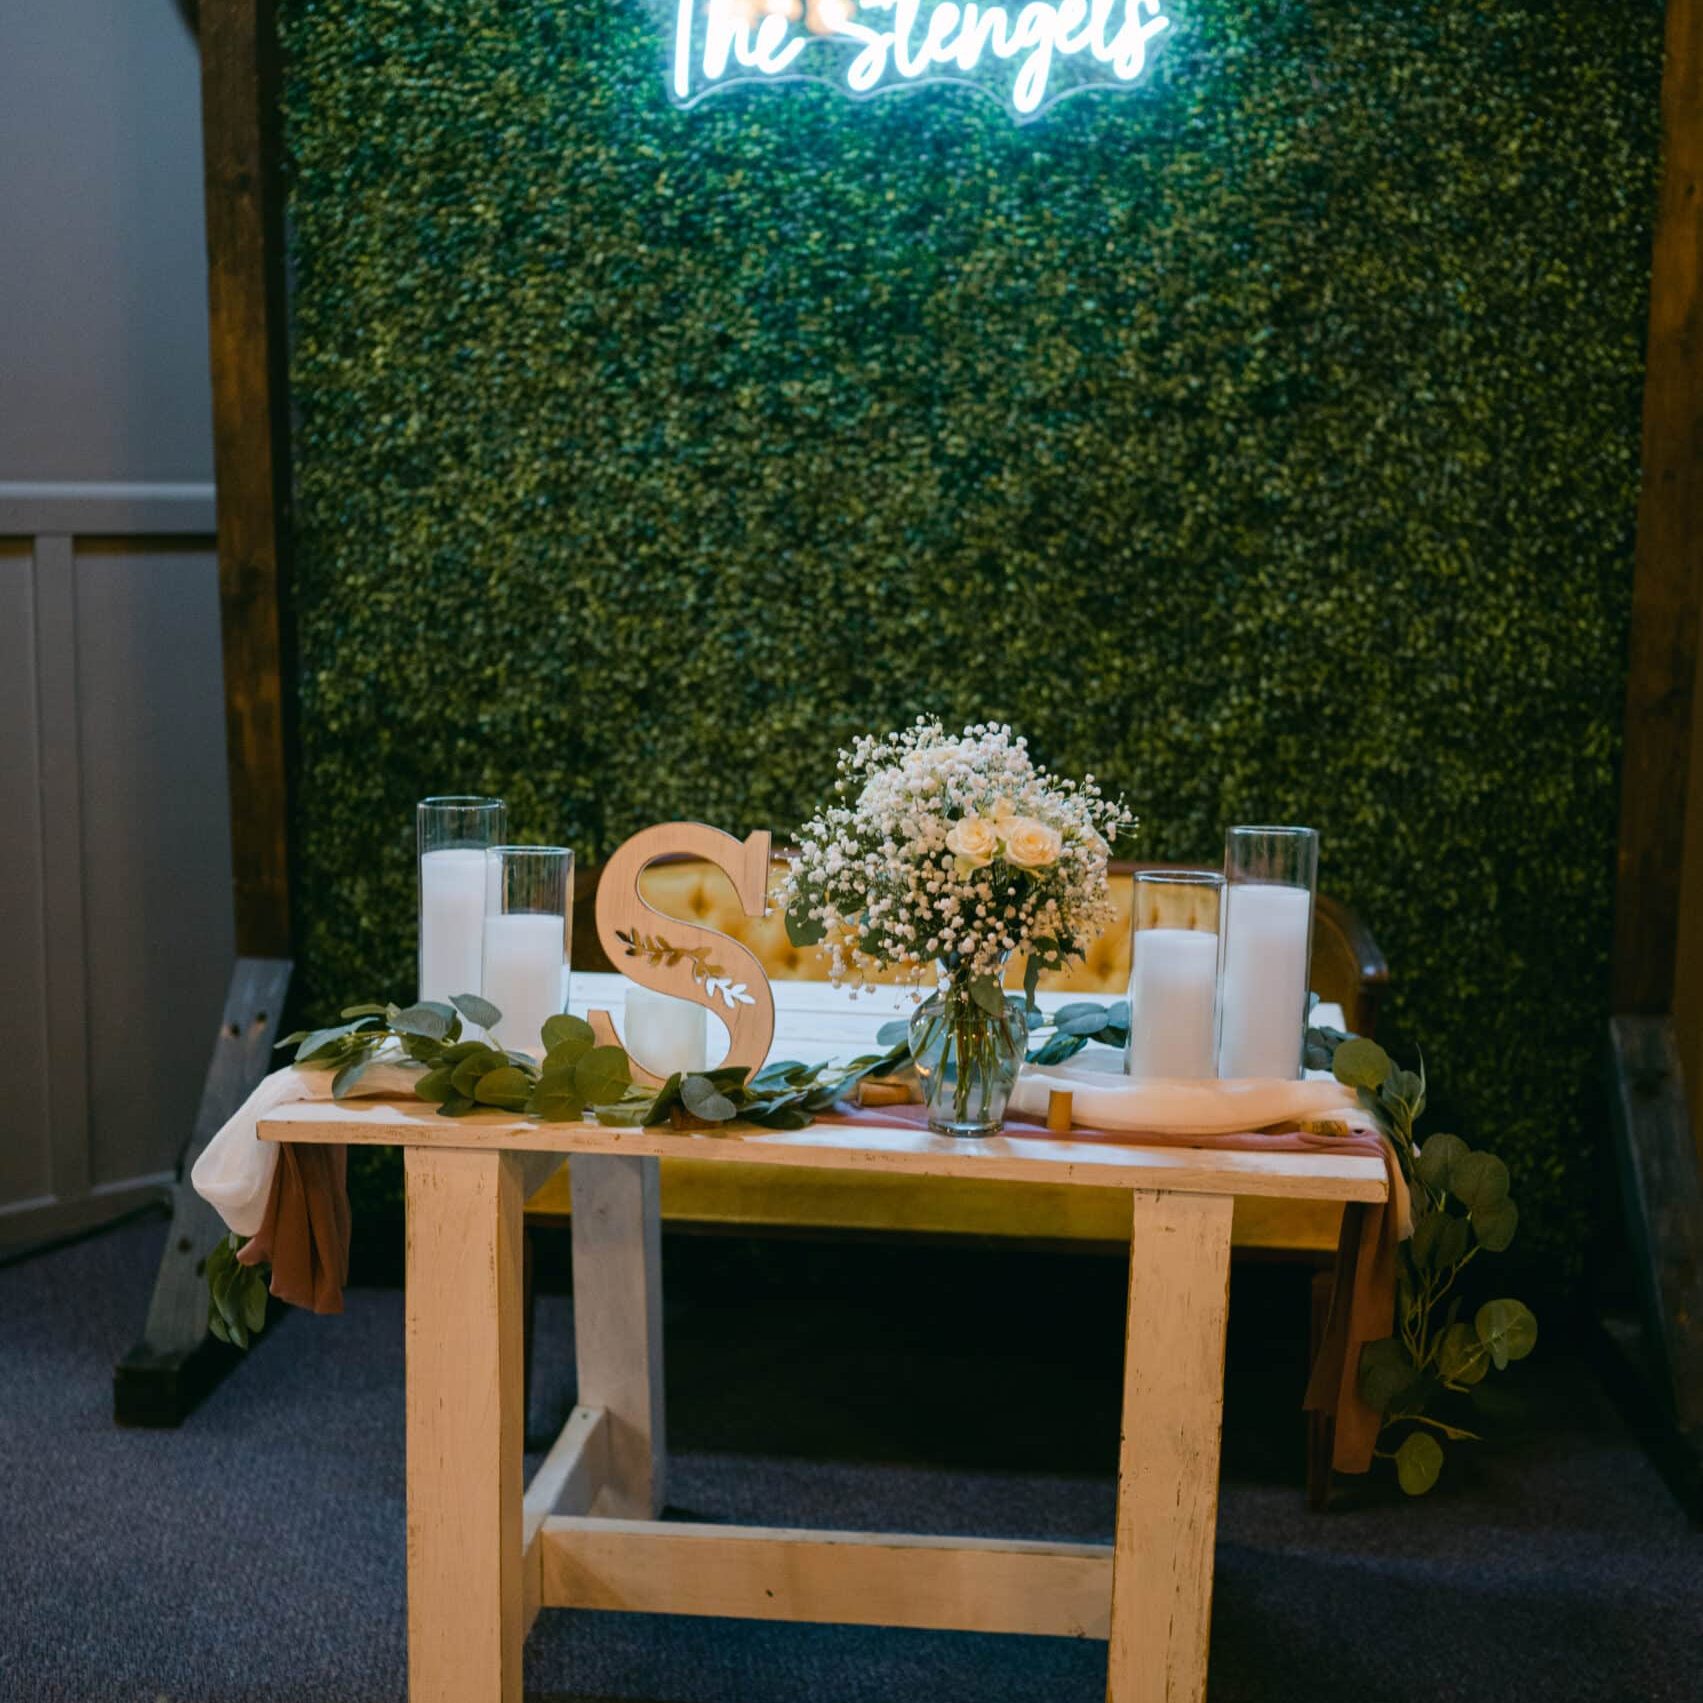 Bride and groom's reception table